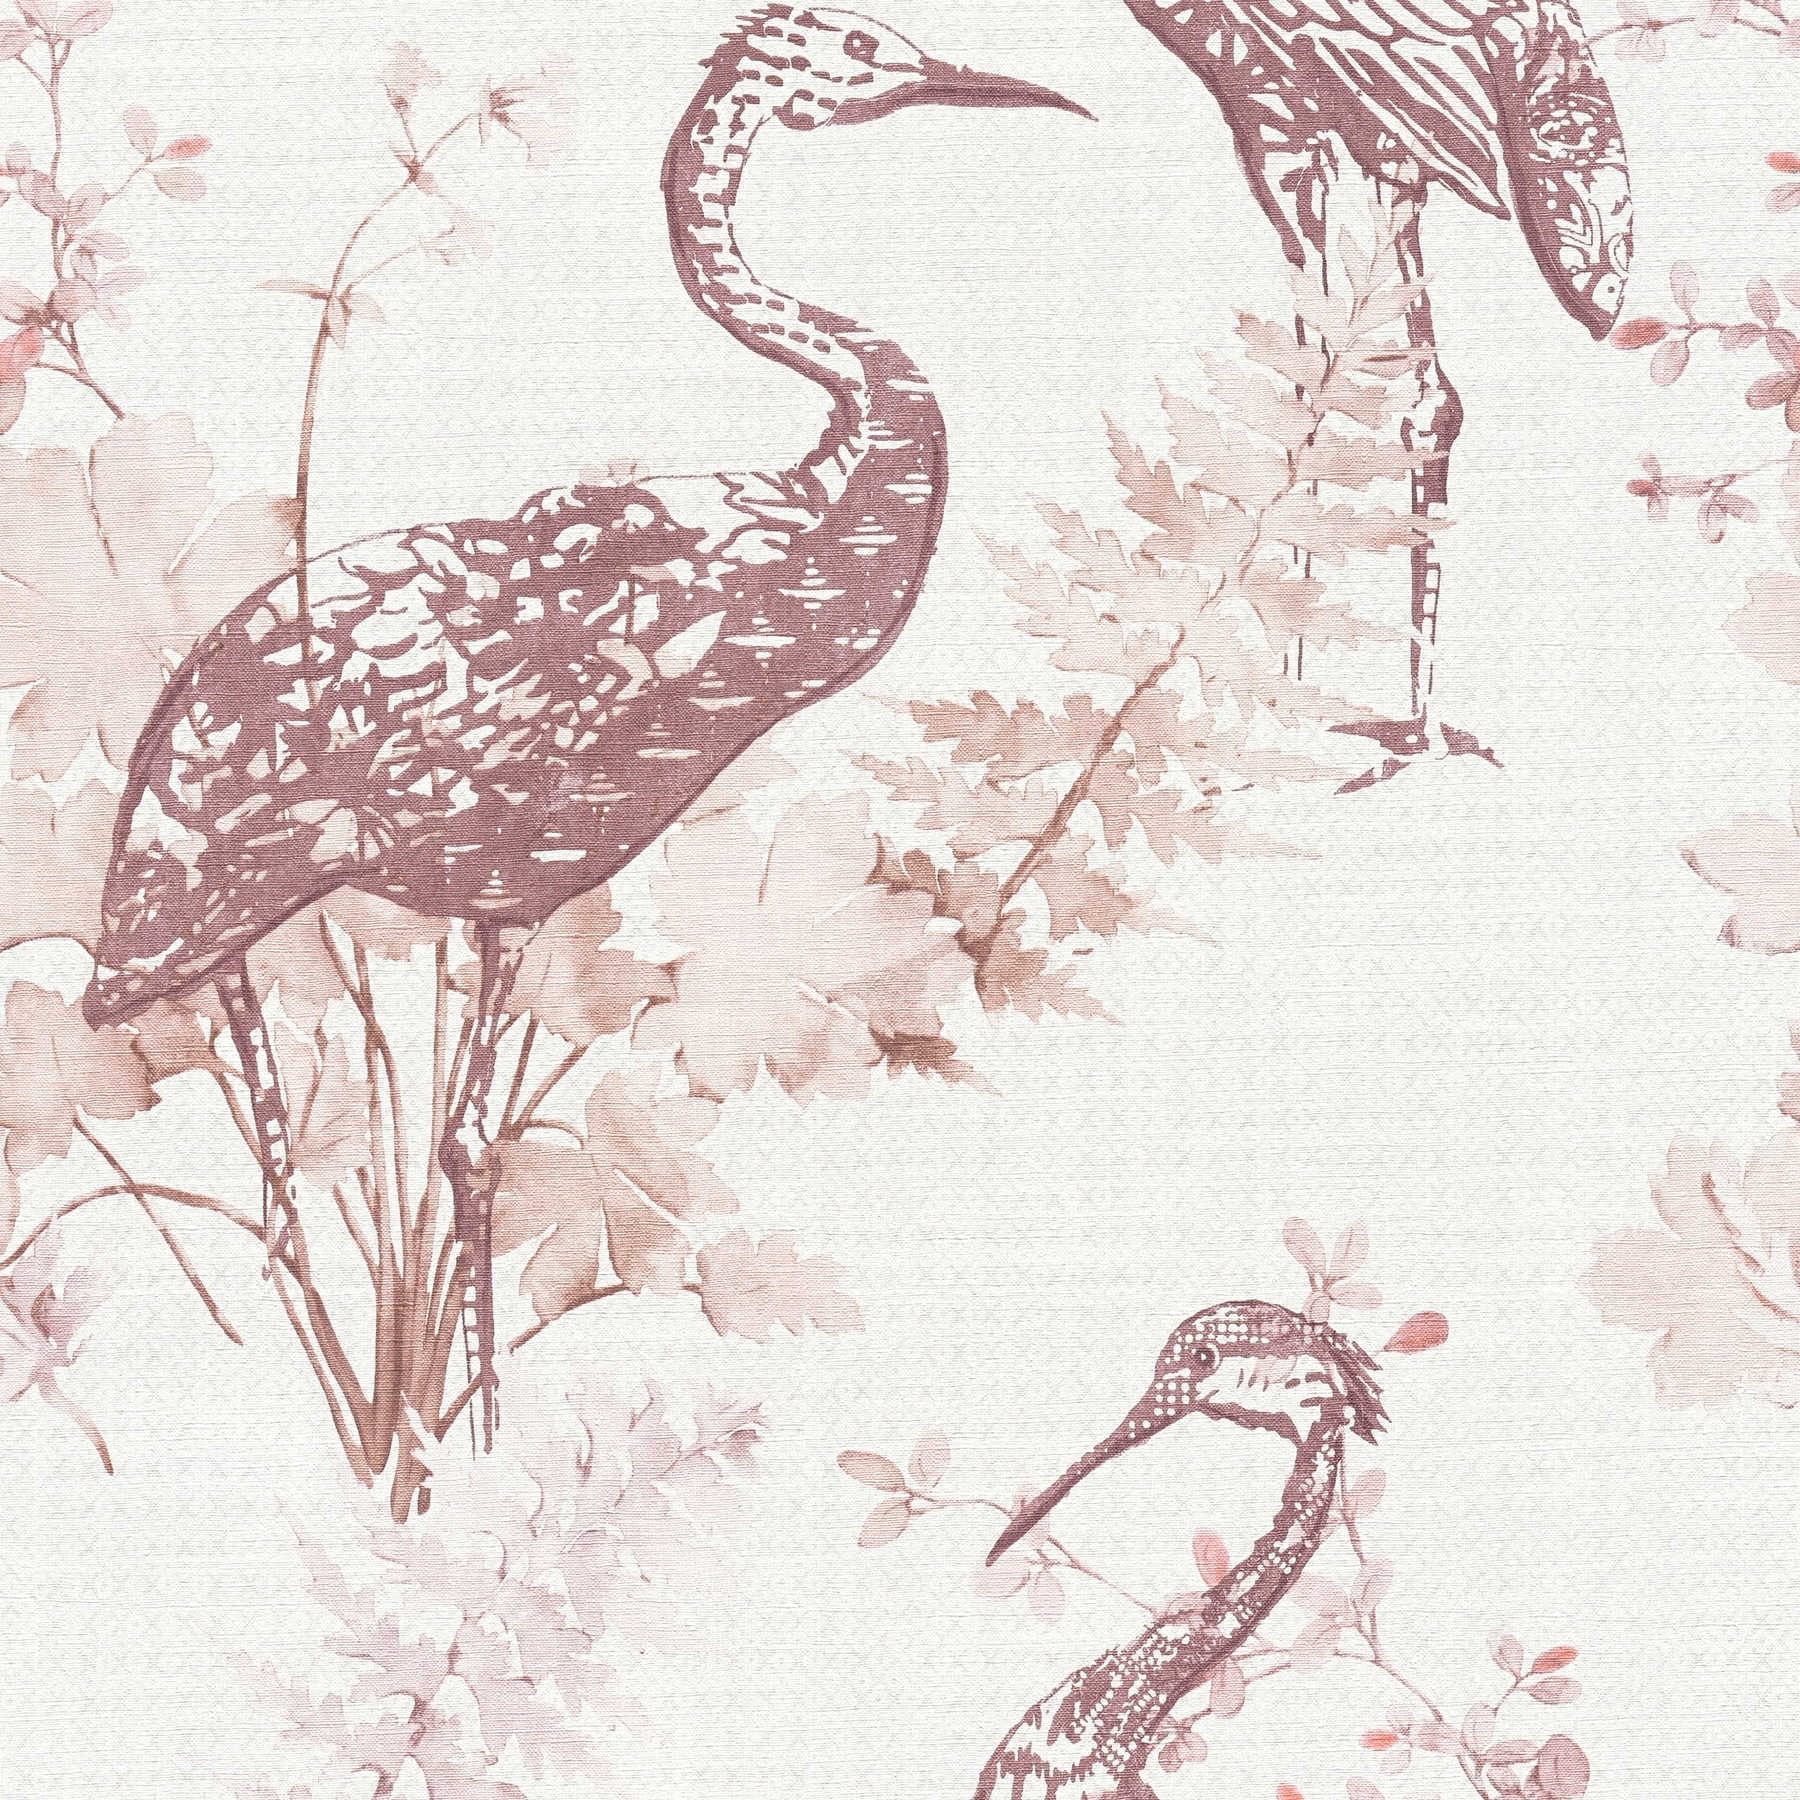 Wallpaper nature birds & leaves in watercolour style - beige, pink
